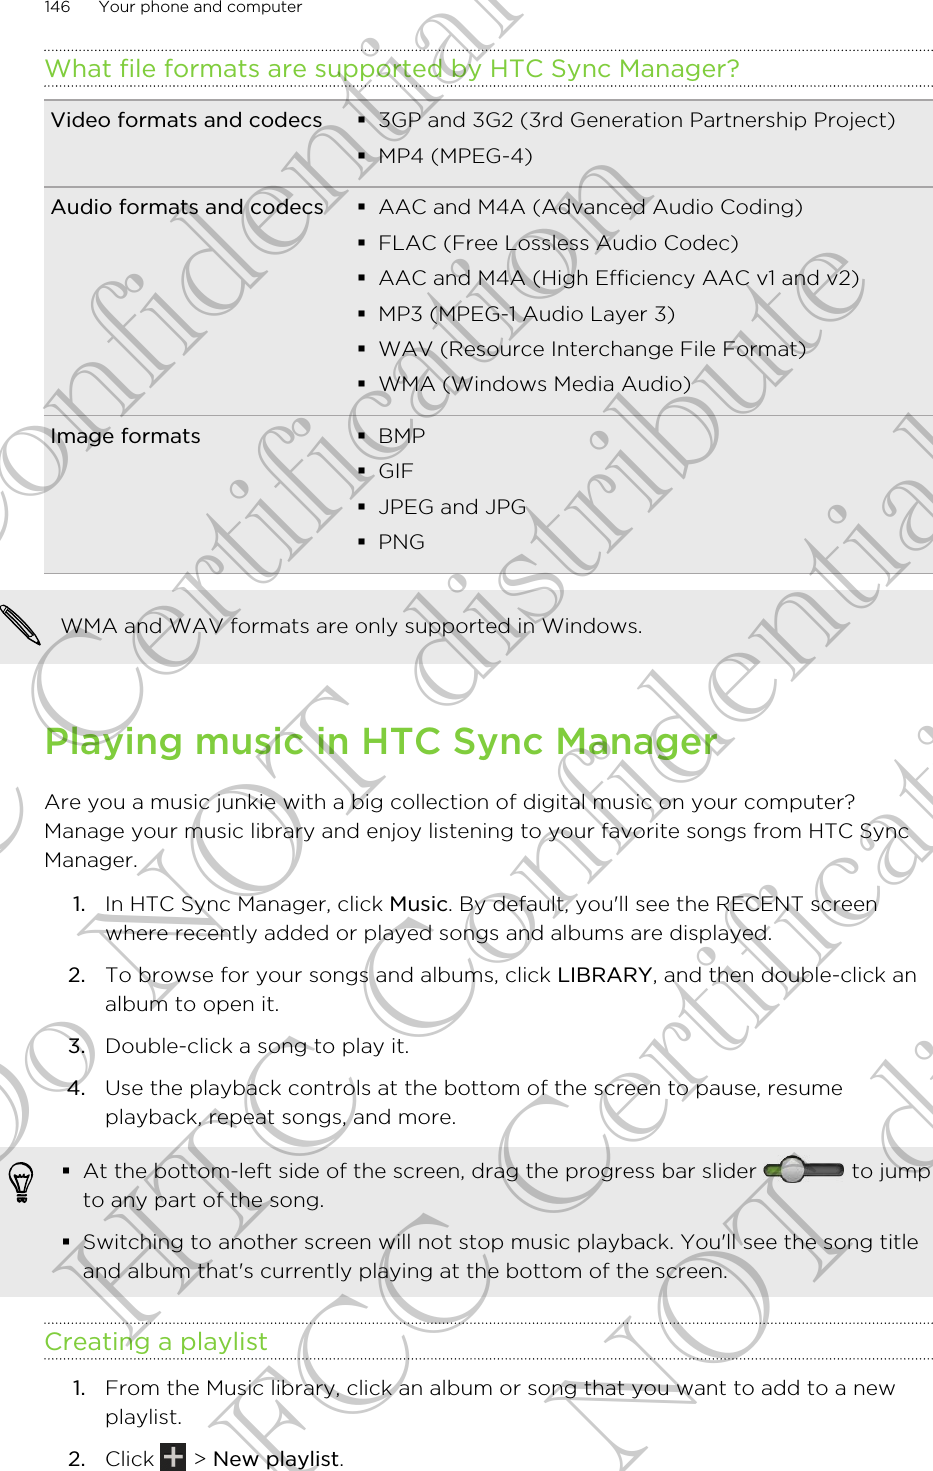 What file formats are supported by HTC Sync Manager?Video formats and codecs §3GP and 3G2 (3rd Generation Partnership Project)§MP4 (MPEG-4)Audio formats and codecs §AAC and M4A (Advanced Audio Coding)§FLAC (Free Lossless Audio Codec)§AAC and M4A (High Efficiency AAC v1 and v2)§MP3 (MPEG-1 Audio Layer 3)§WAV (Resource Interchange File Format)§WMA (Windows Media Audio)Image formats §BMP§GIF§JPEG and JPG§PNGWMA and WAV formats are only supported in Windows.Playing music in HTC Sync ManagerAre you a music junkie with a big collection of digital music on your computer?Manage your music library and enjoy listening to your favorite songs from HTC SyncManager.1. In HTC Sync Manager, click Music. By default, you&apos;ll see the RECENT screenwhere recently added or played songs and albums are displayed.2. To browse for your songs and albums, click LIBRARY, and then double-click analbum to open it.3. Double-click a song to play it.4. Use the playback controls at the bottom of the screen to pause, resumeplayback, repeat songs, and more.§At the bottom-left side of the screen, drag the progress bar slider   to jumpto any part of the song.§Switching to another screen will not stop music playback. You&apos;ll see the song titleand album that&apos;s currently playing at the bottom of the screen.Creating a playlist1. From the Music library, click an album or song that you want to add to a newplaylist.2. Click   &gt; New playlist.146 Your phone and computerHTC Confidential FCC Certification Do NOT distribute HTC Confidential FCC Certification Do NOT distribute